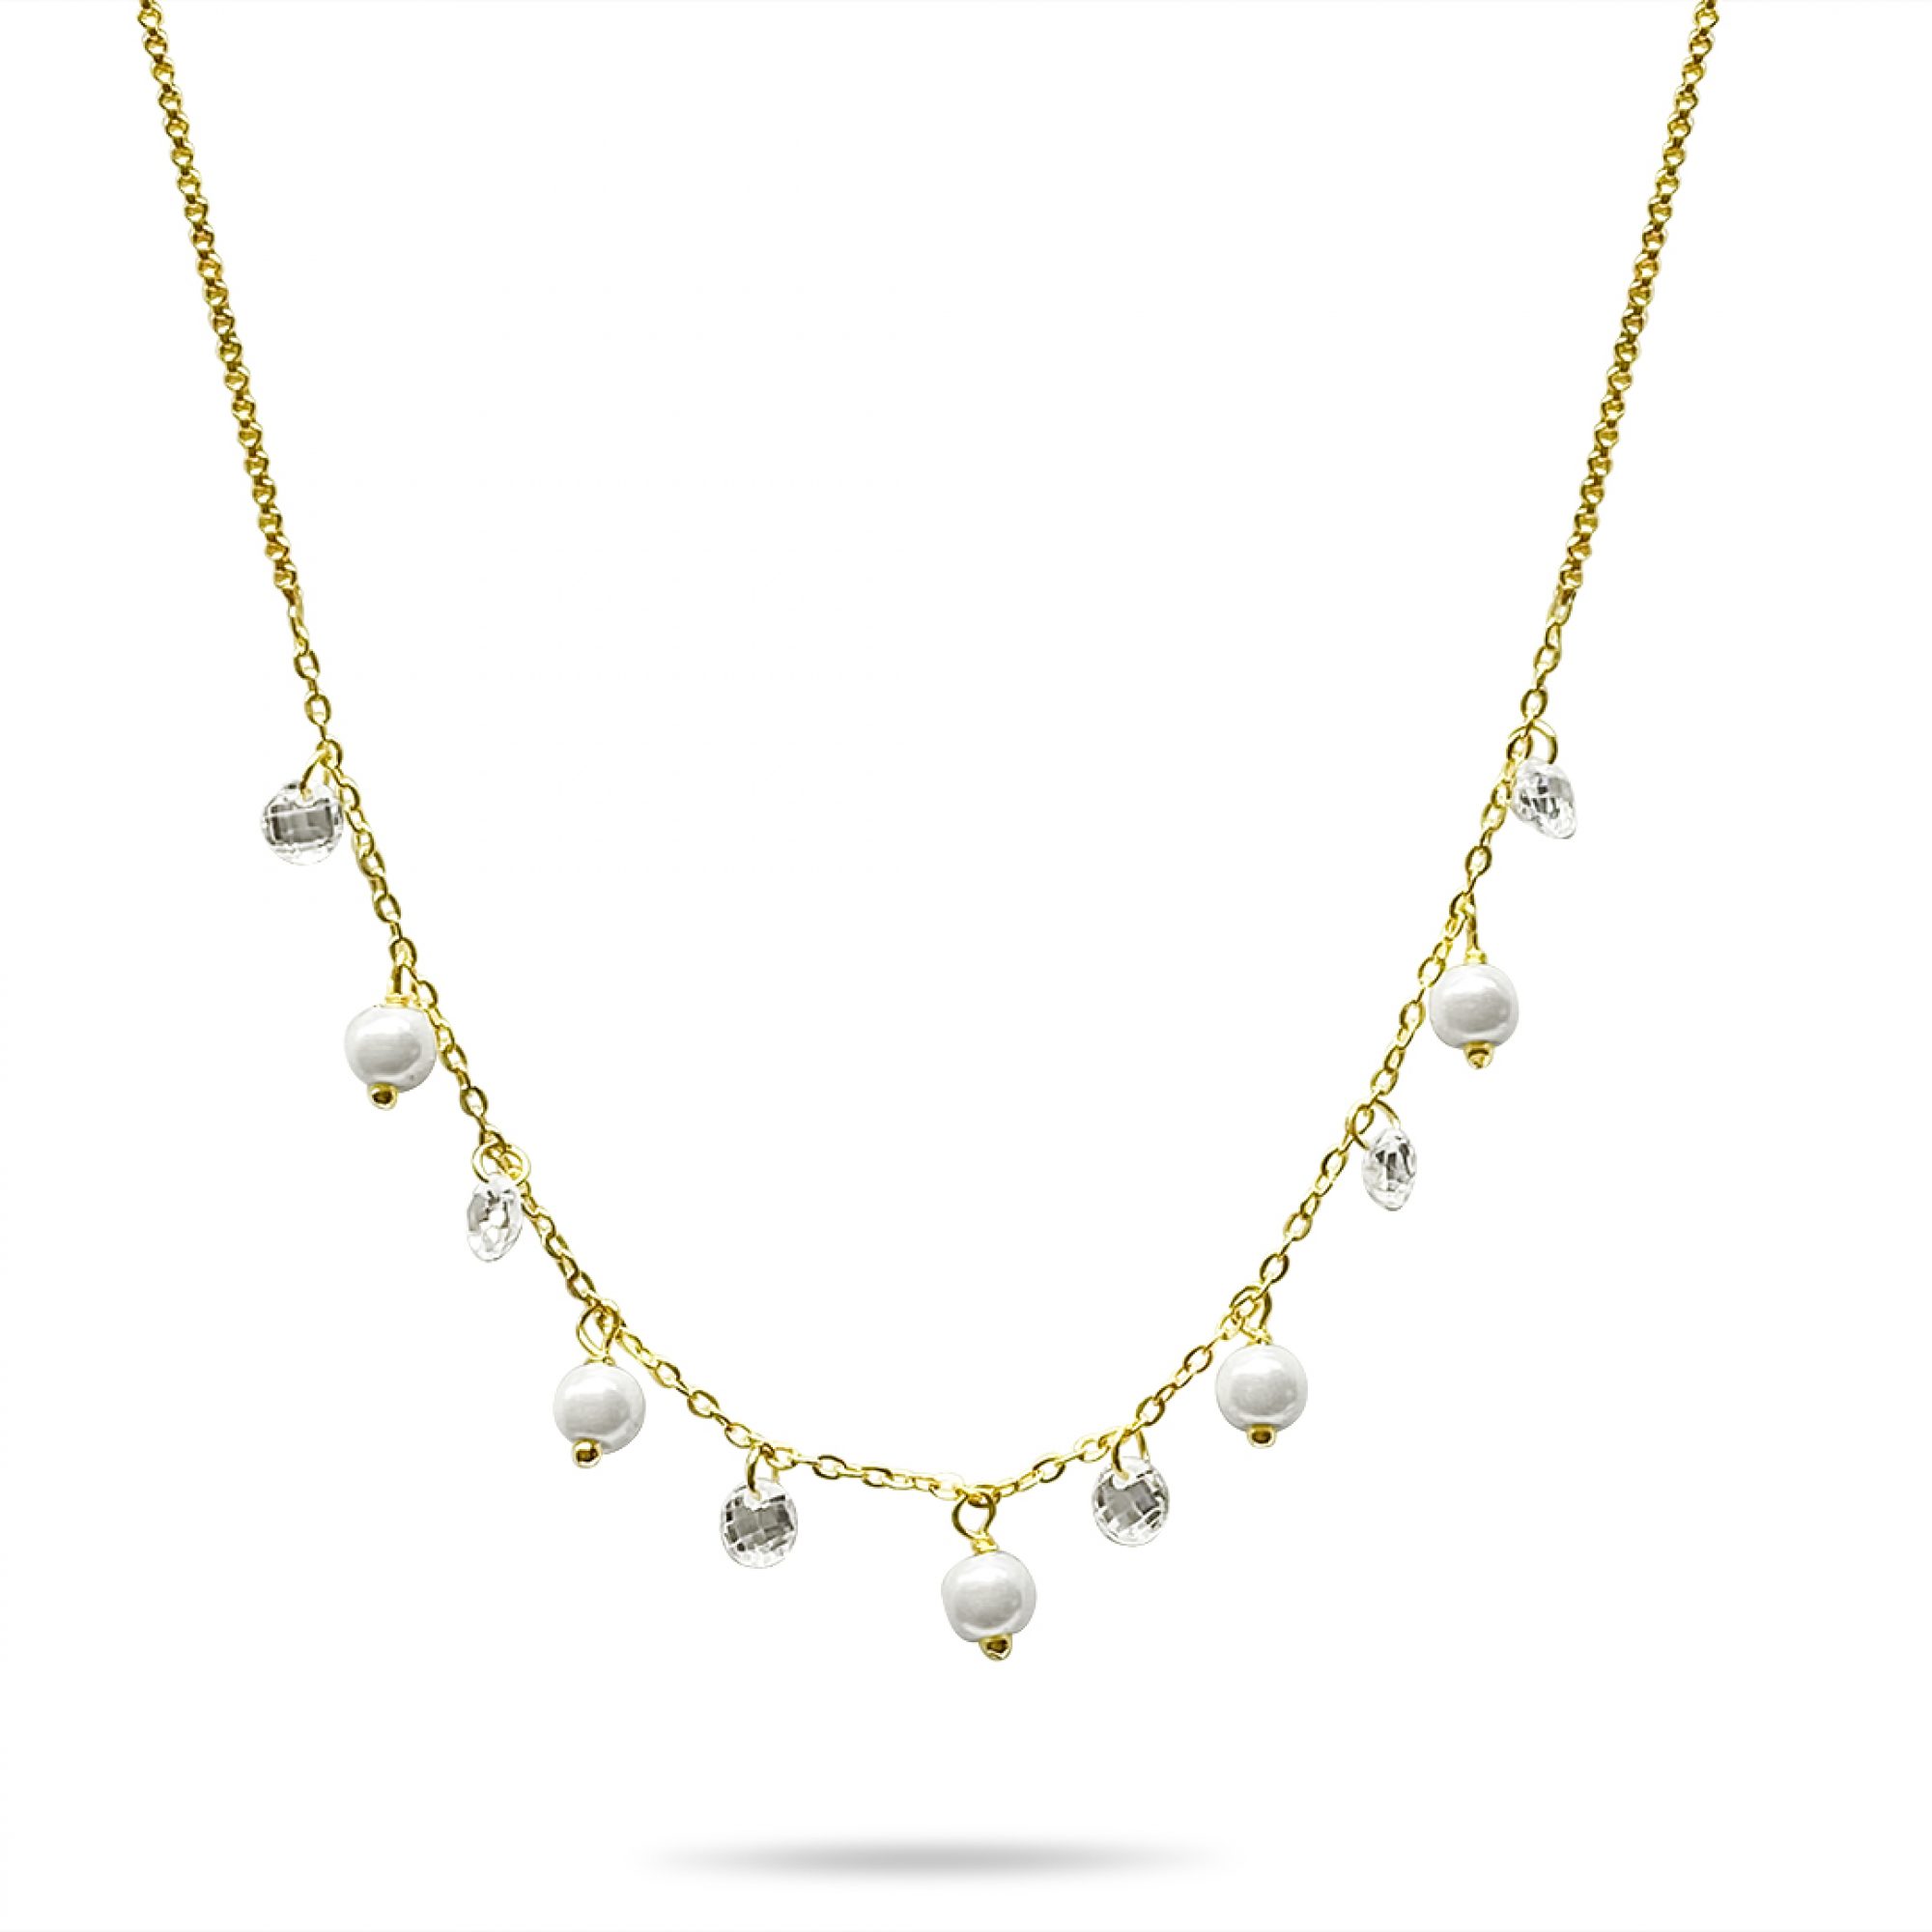 Gold plated necklace with zircon stones and pearls